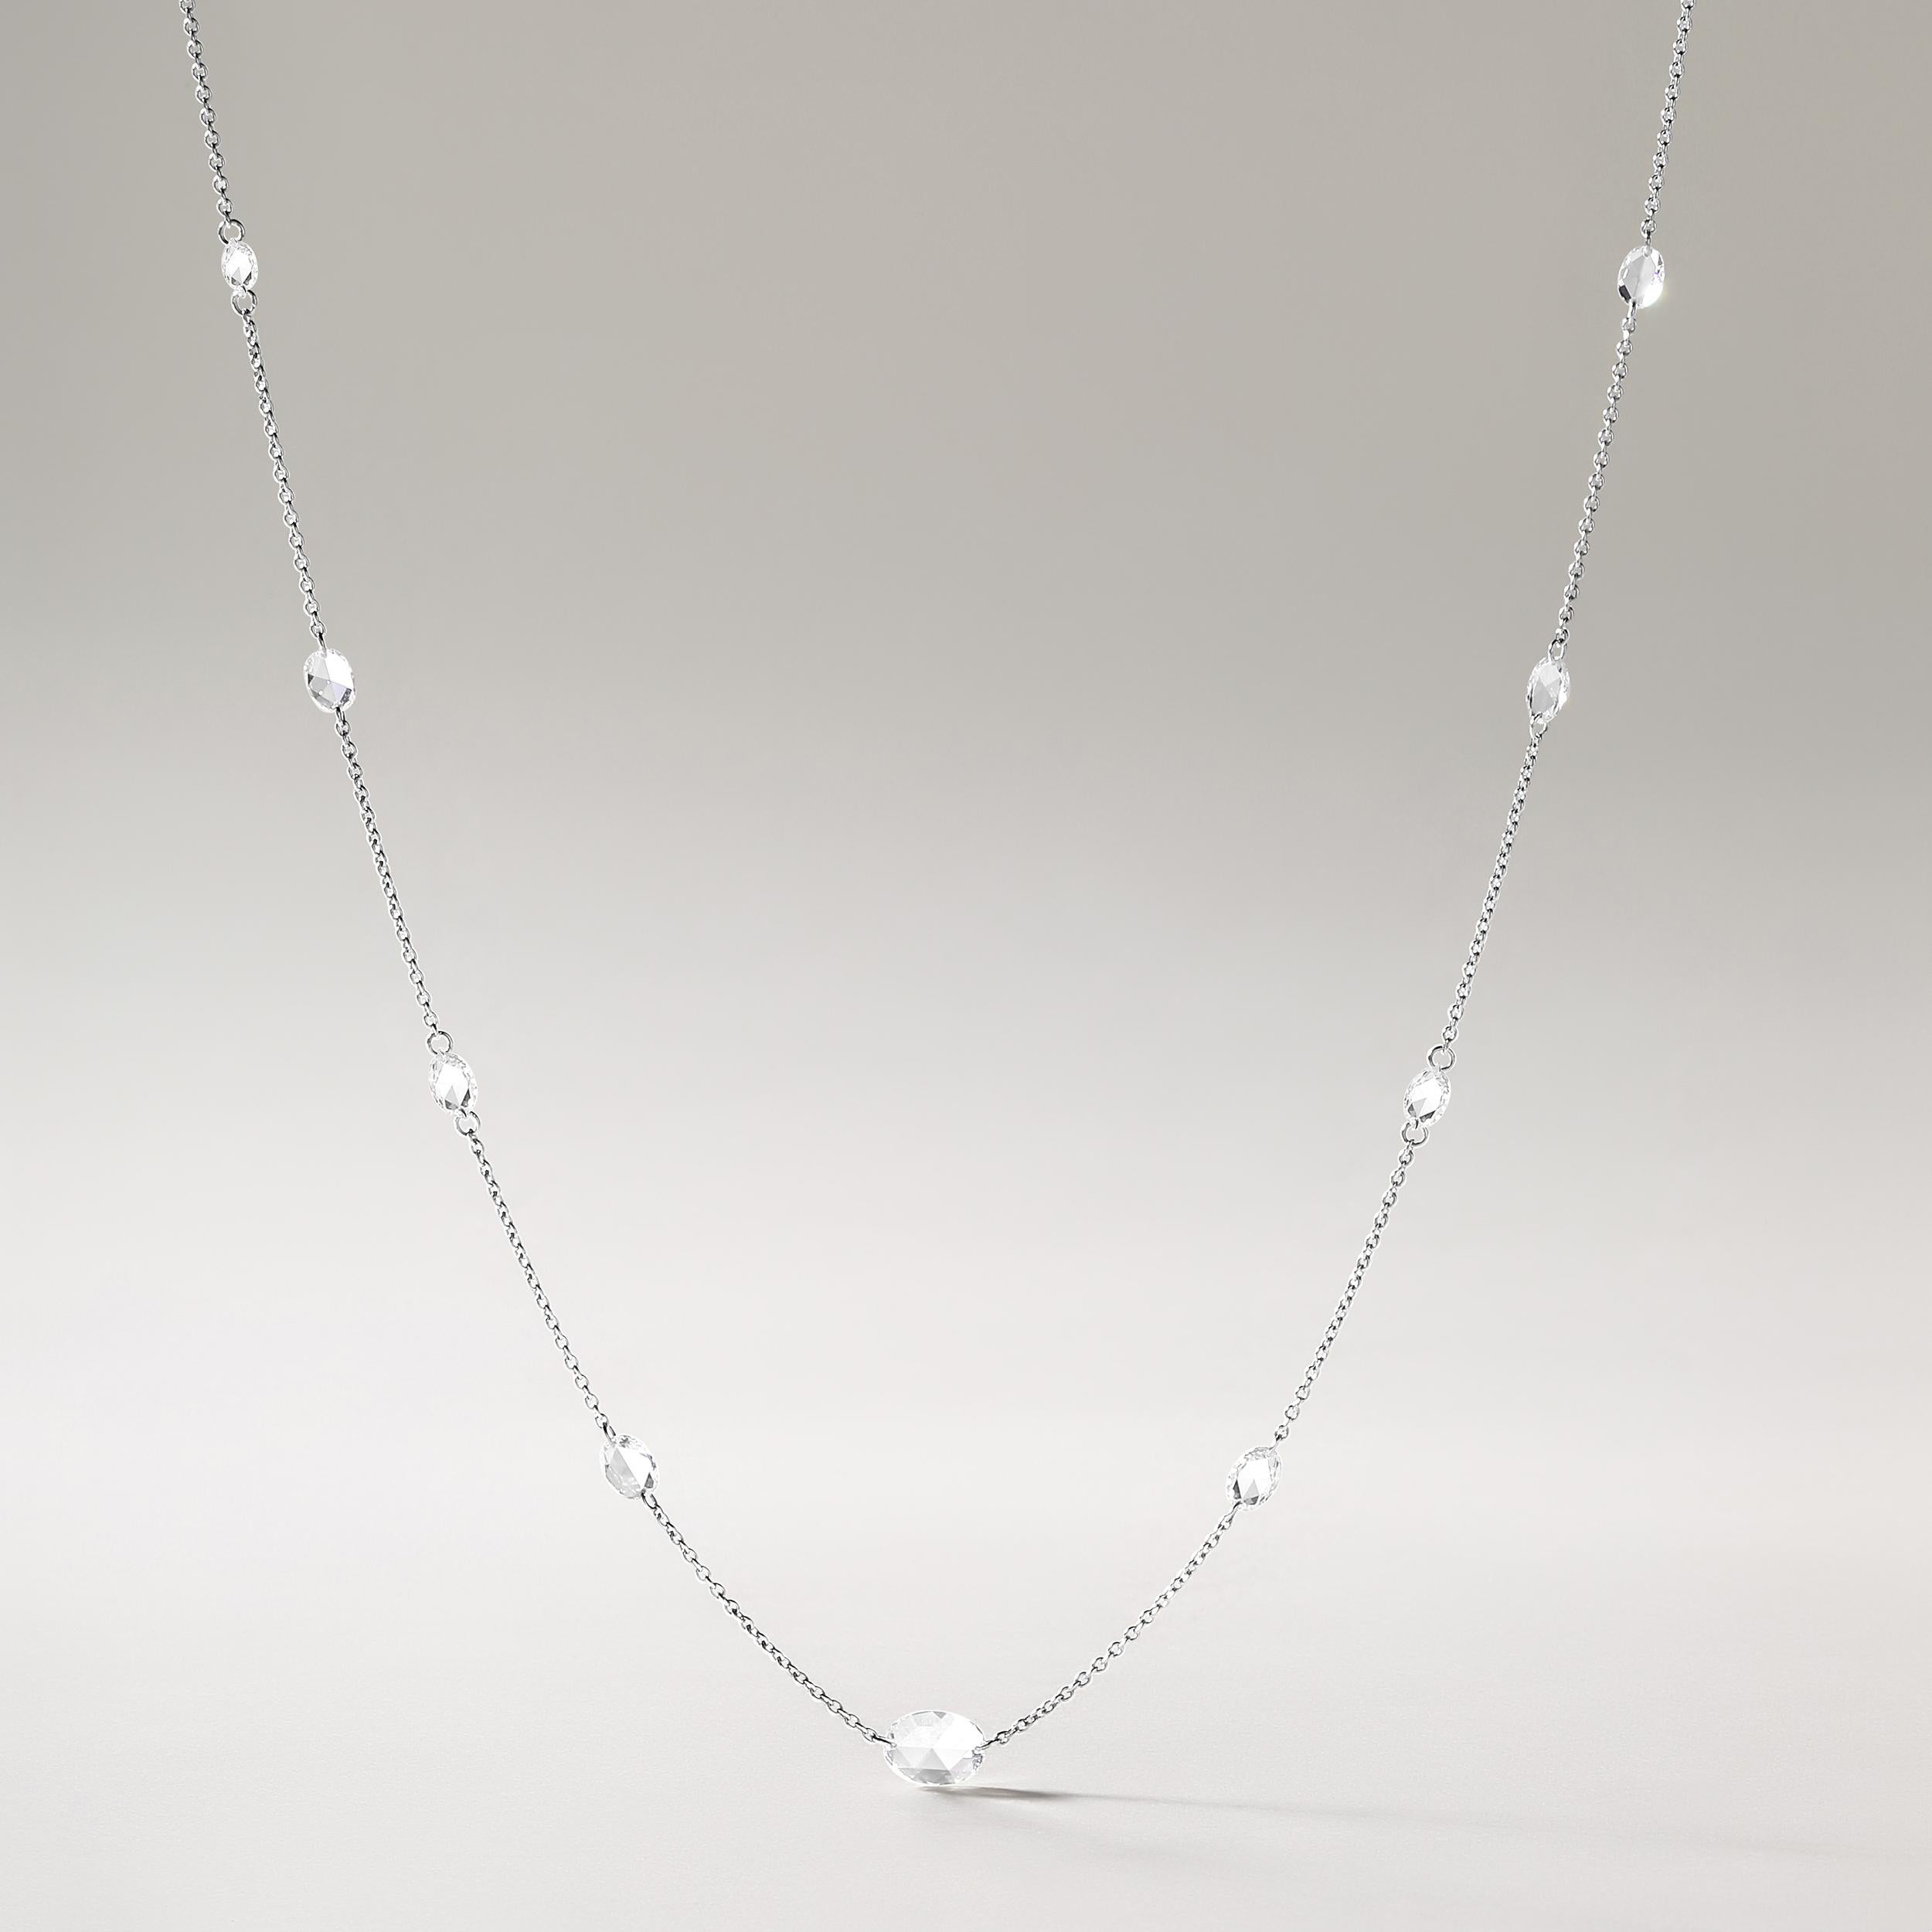 Crafted in 1.94 grams of 18K White Gold, the necklace contains 16 stones of Oval Shaped Rose Cut Natural Natural Diamonds with a total of 1.65 carat in E-F color and VVS-VS clarity. The necklace length is 18 inches.
This jewelry piece will be